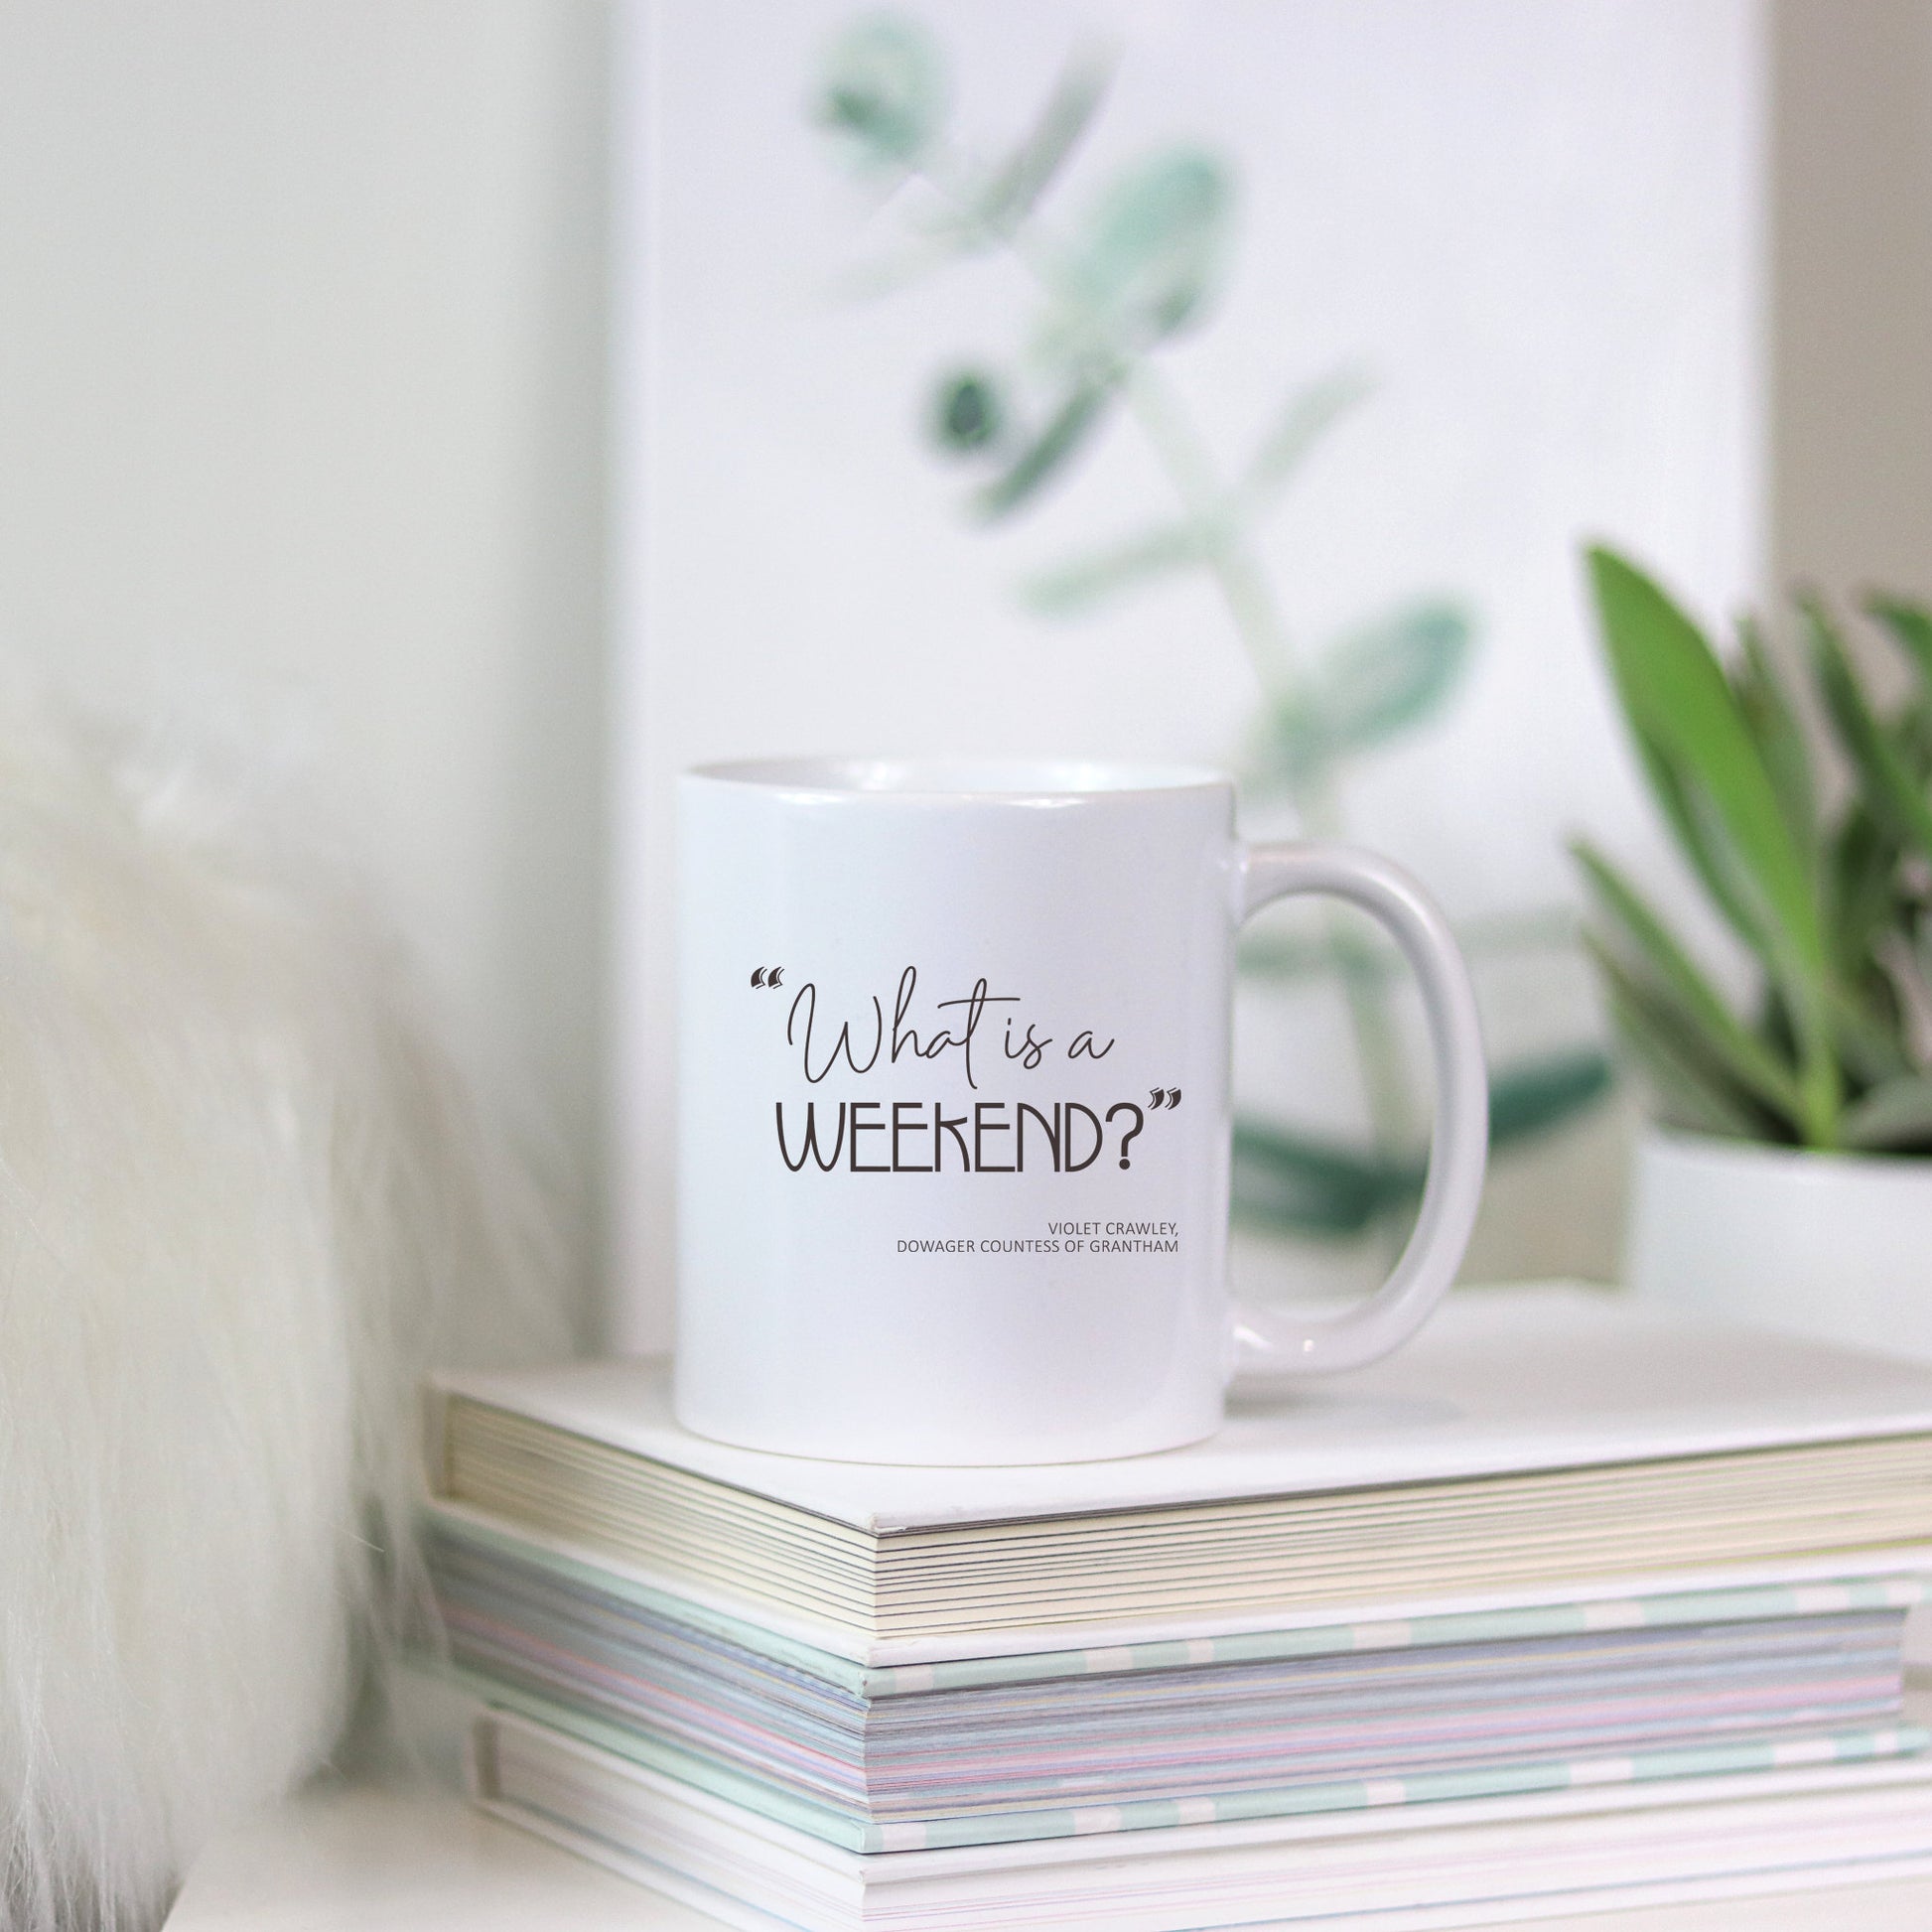 Downton Abbey mug with funny quote